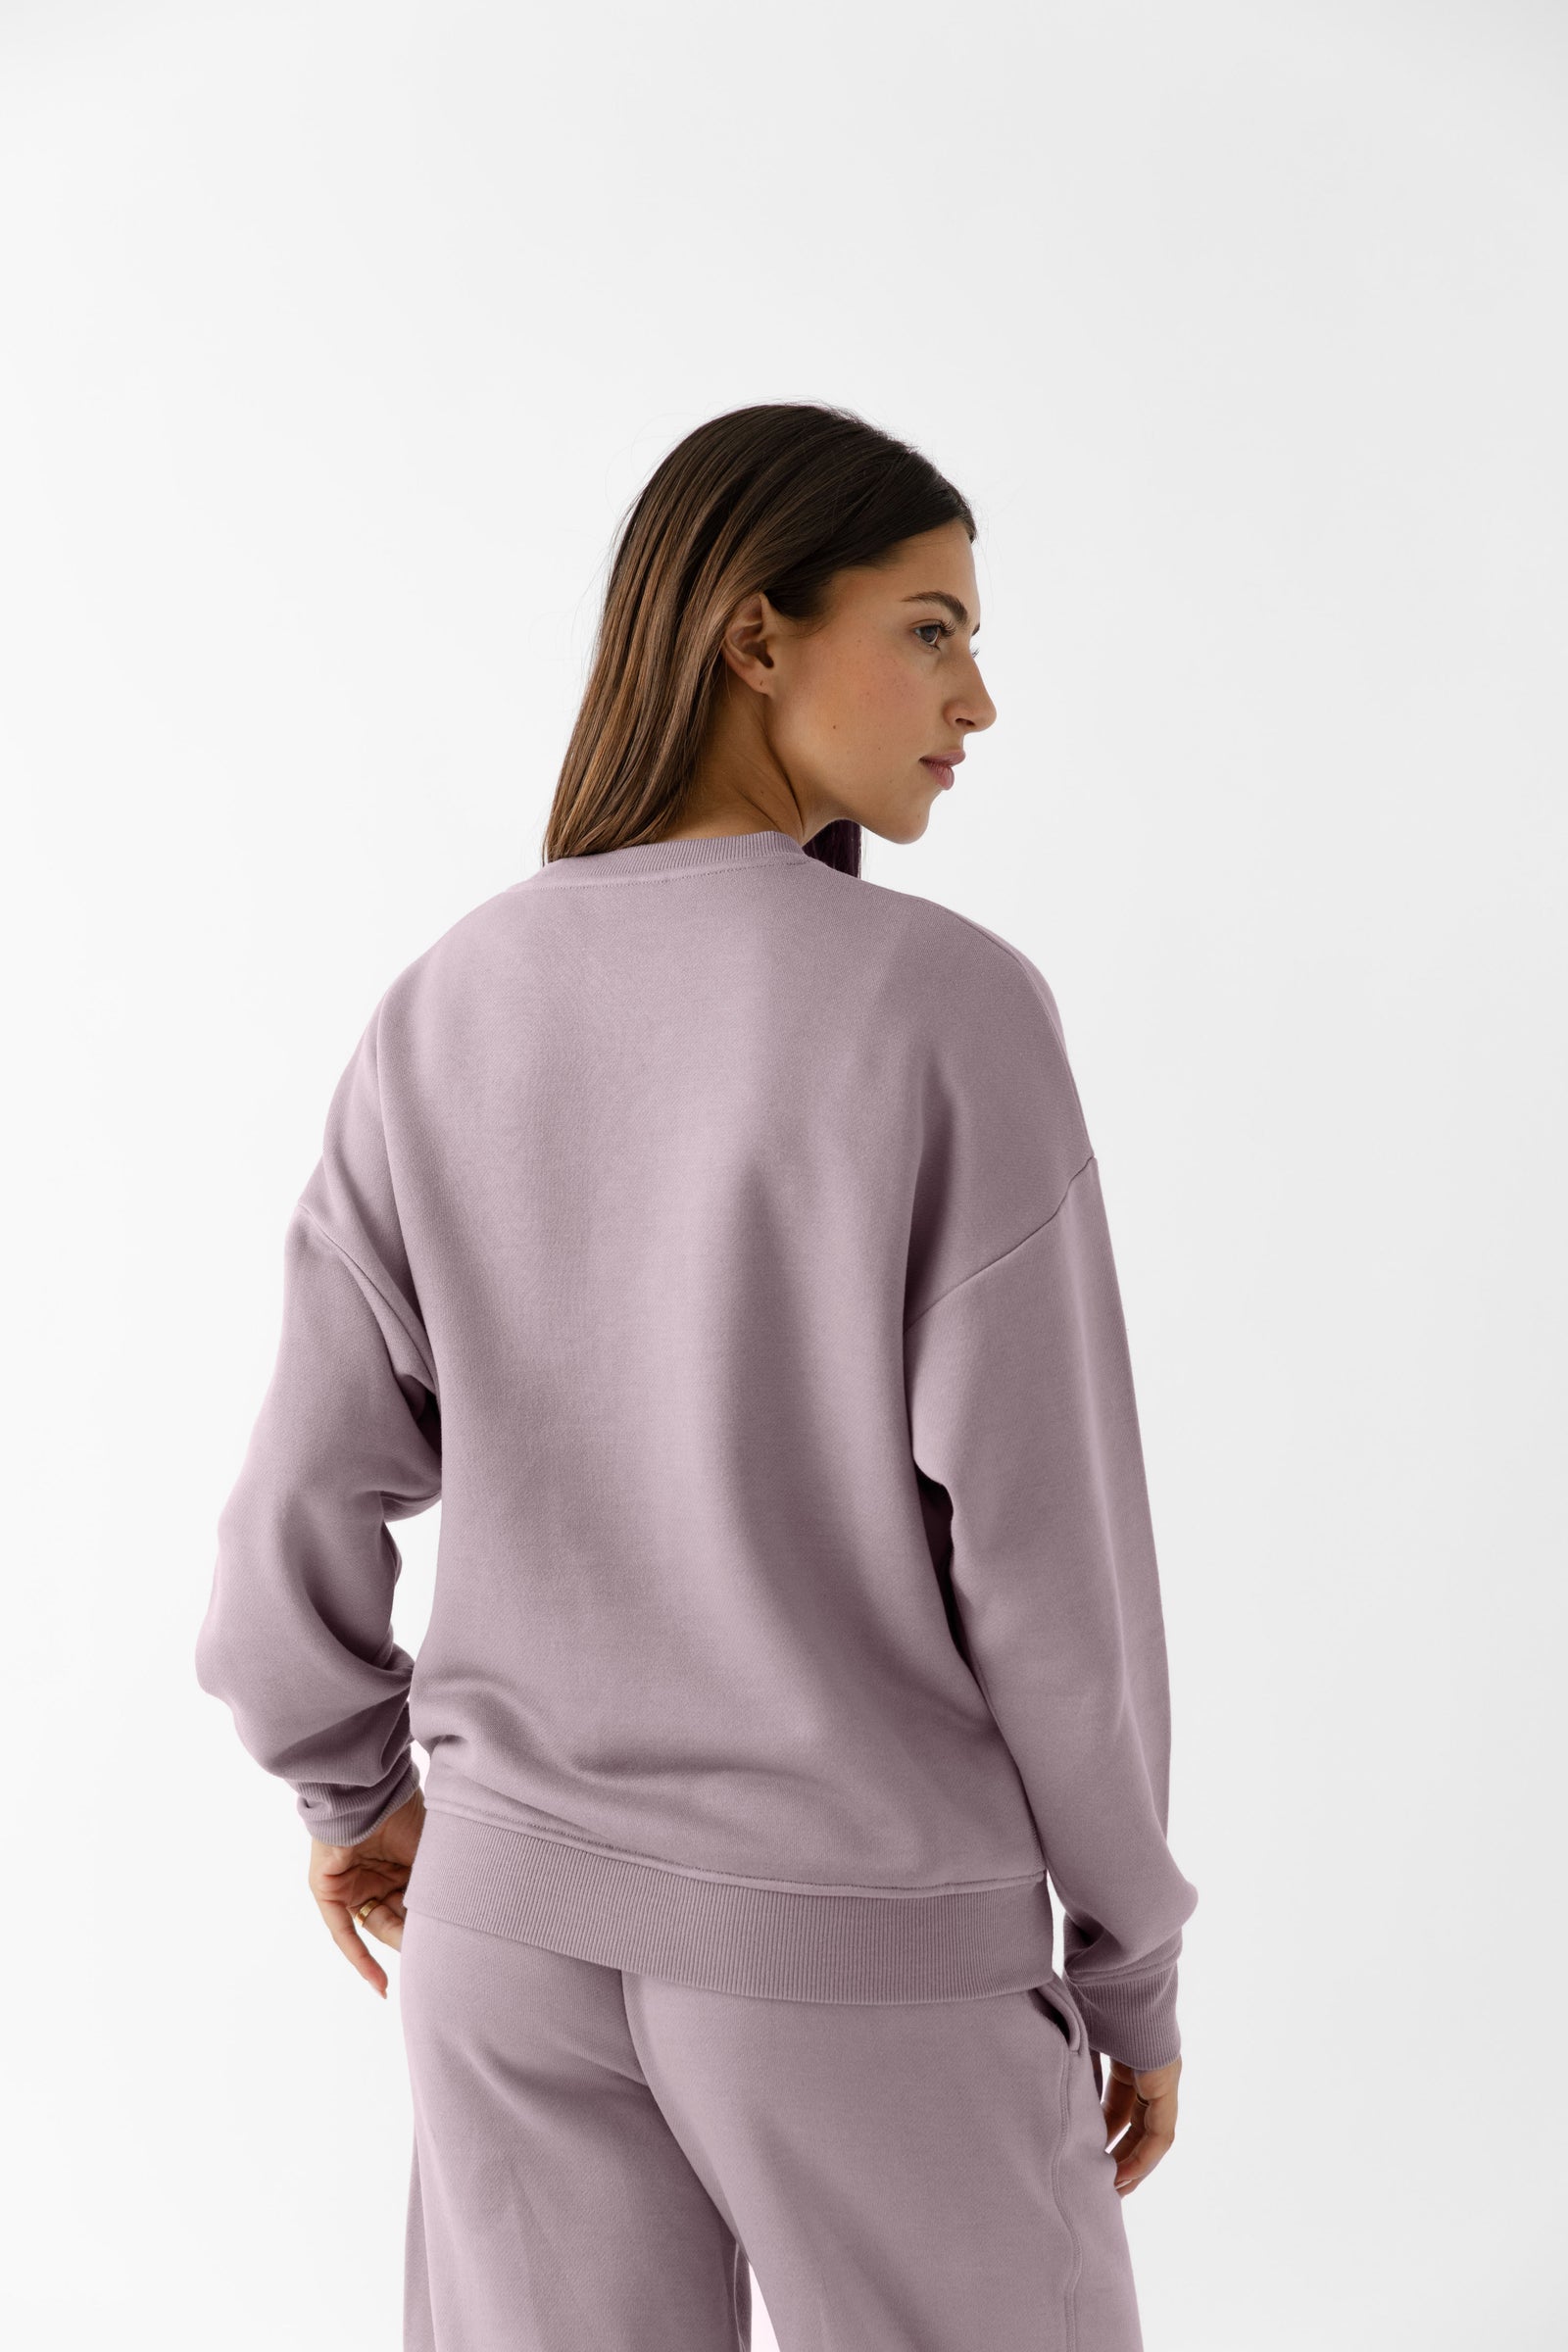 Dusty Orchid CityScape Pullover Crew. The Pullover is being worn by a female model. Accompanying city scape clothing is being worn to complete the look of the outfit. The photo was taken with a white background. 